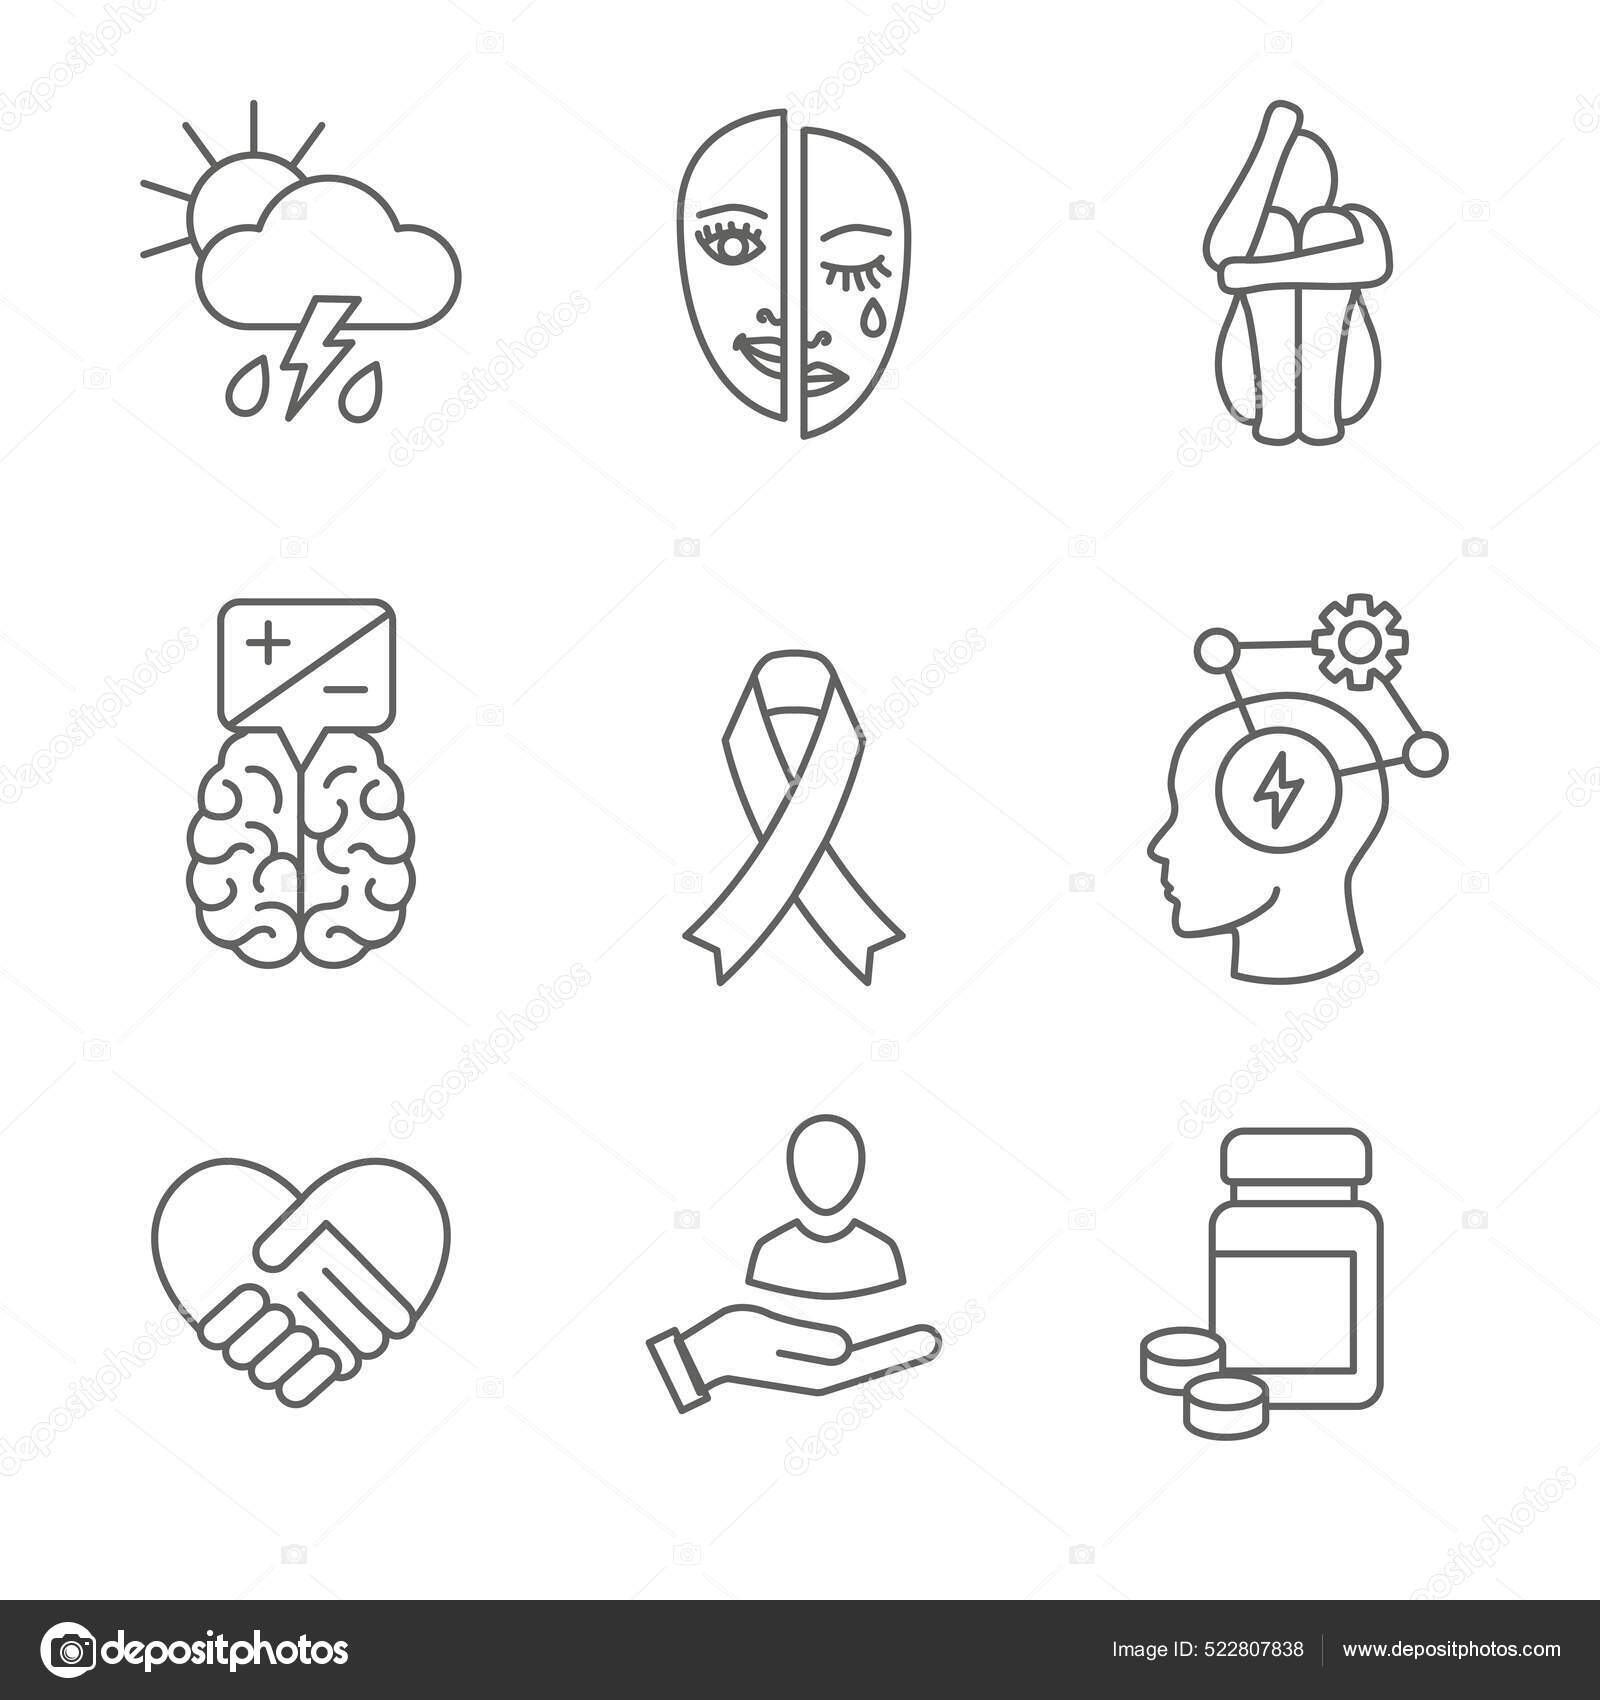 BPD - Borderline Personality Disorder icon set w brain mask and